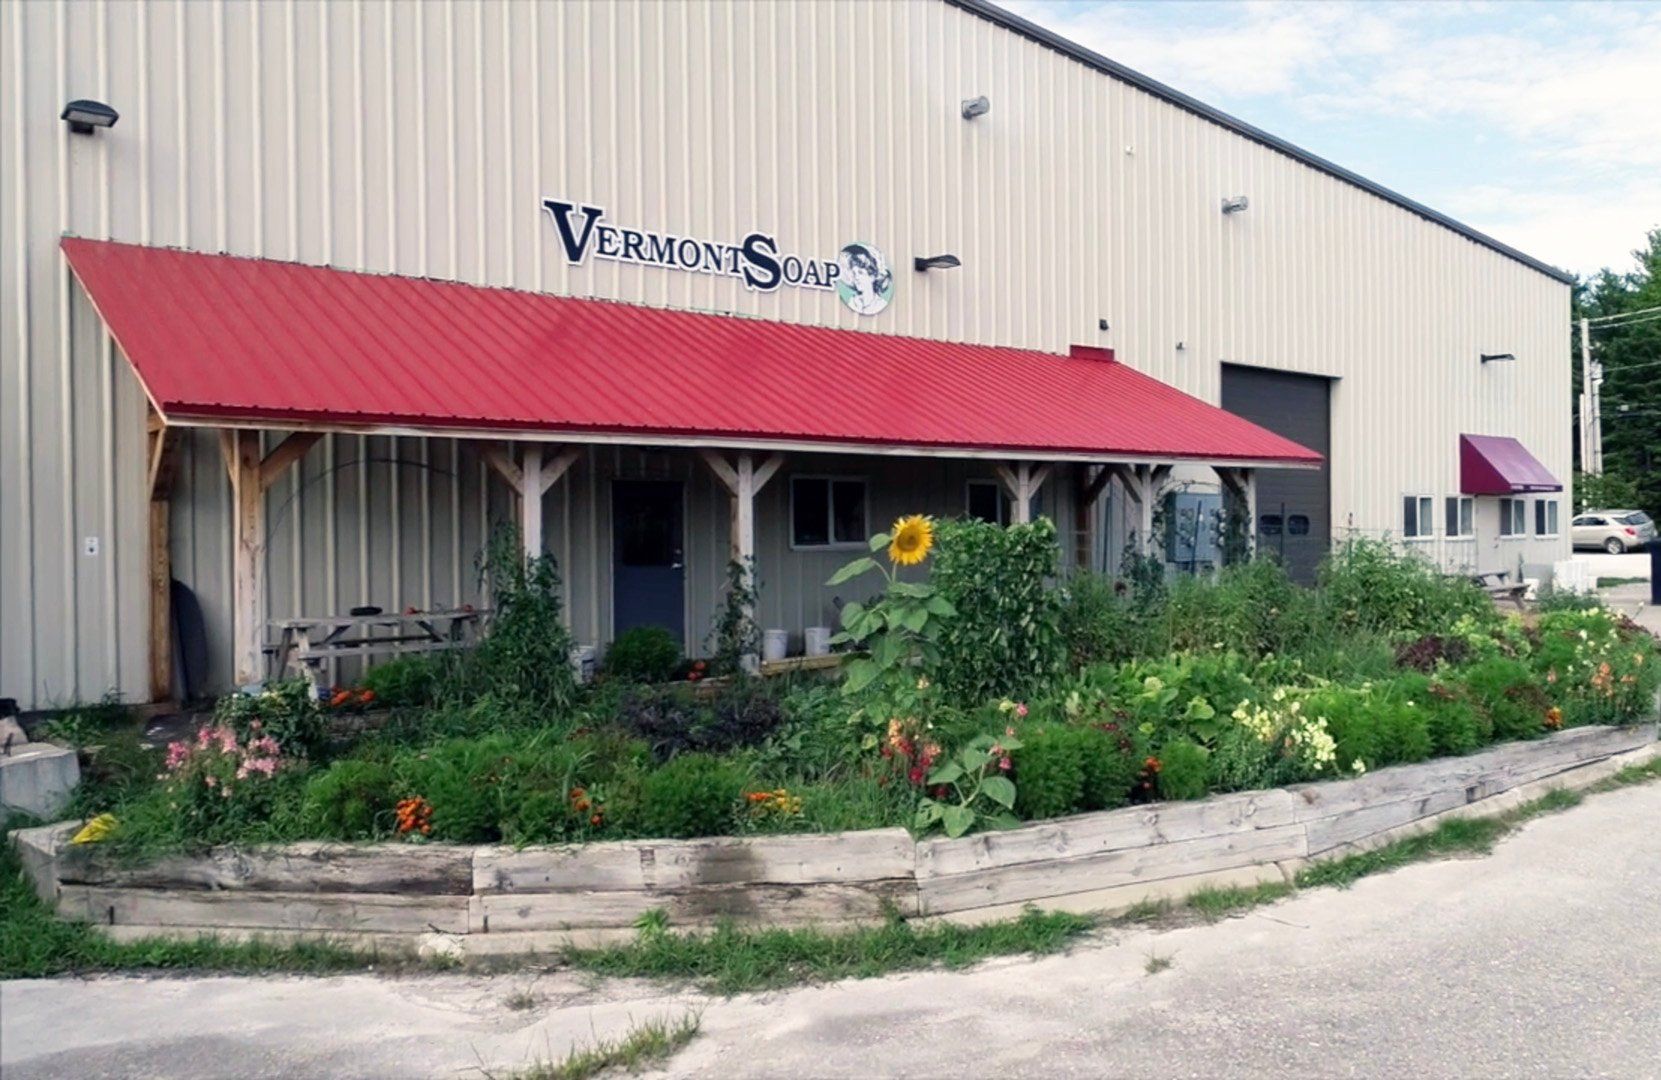 VT Soap Factory in Middlebury, VT